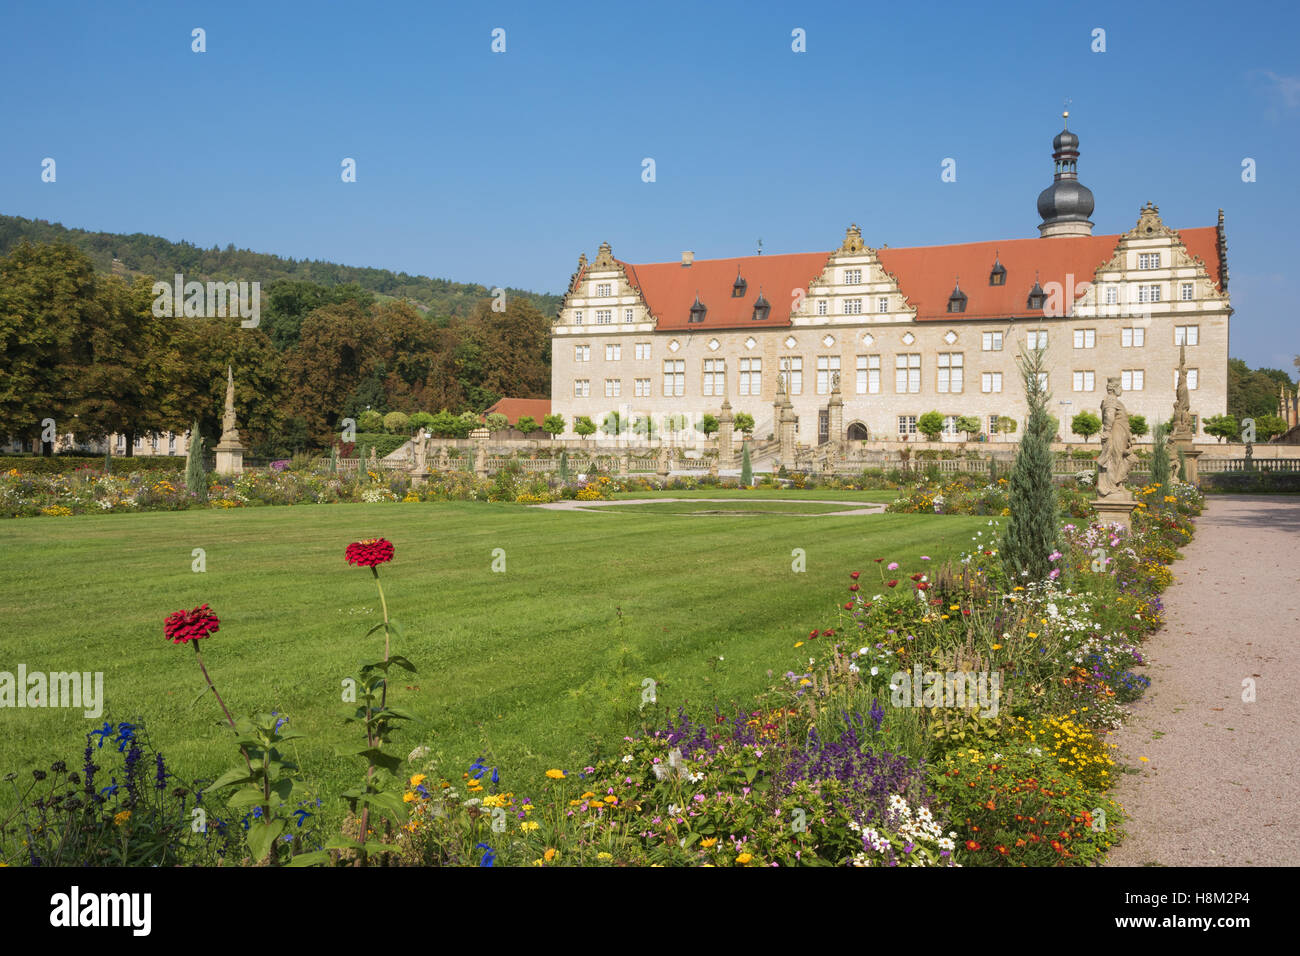 Rear view of the Weikersheim Palace Stock Photo